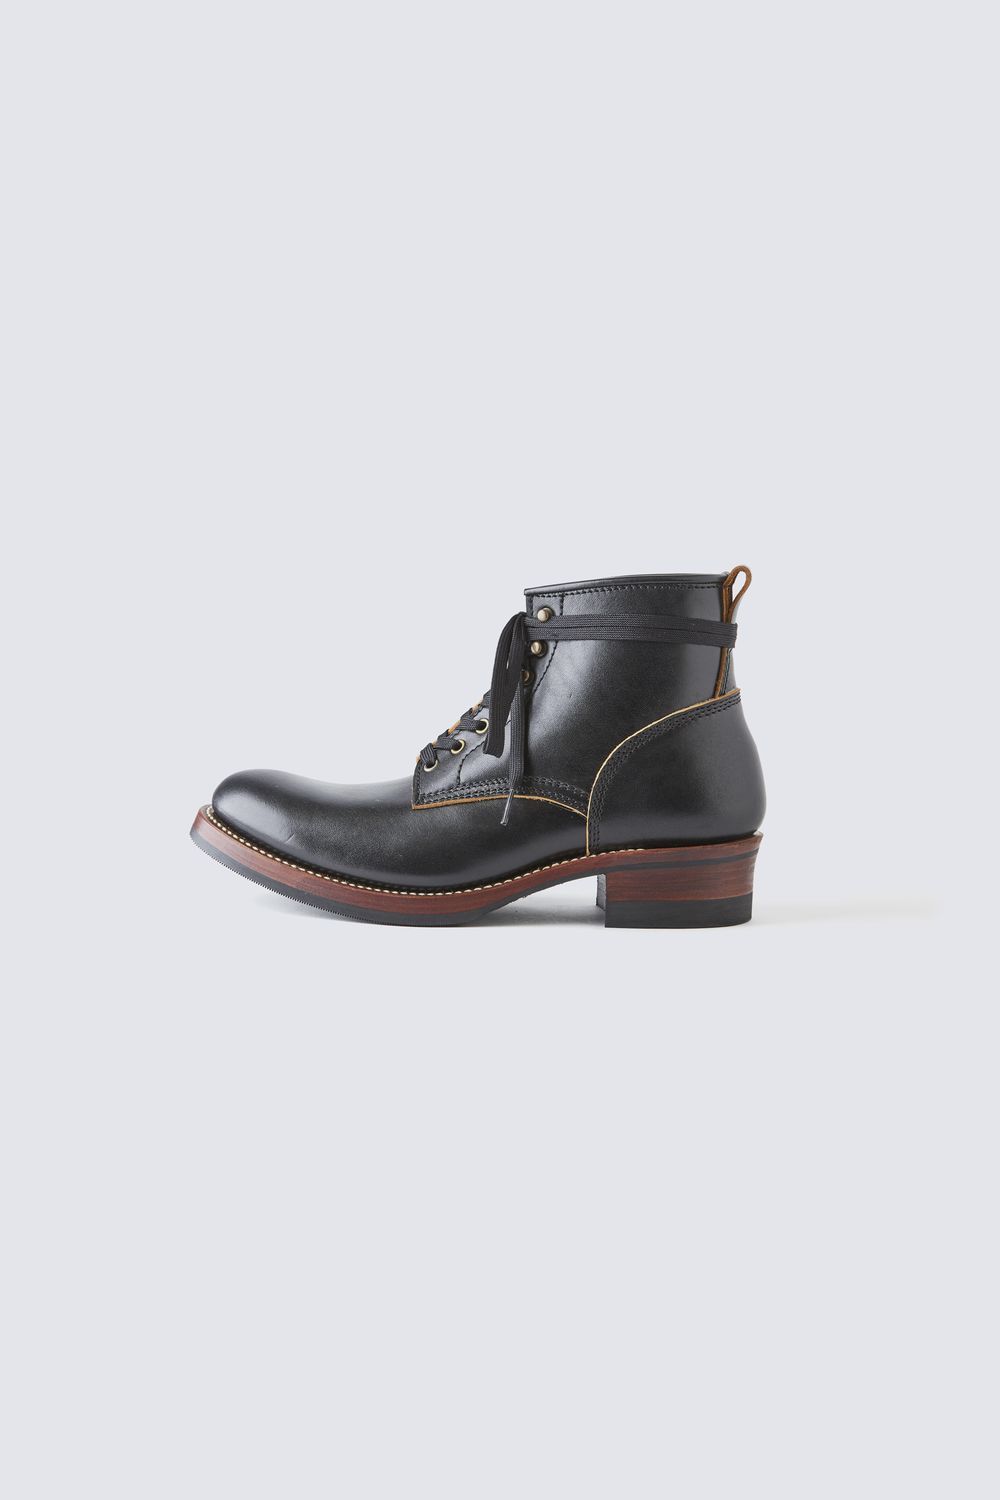 BUILT TO ORDER - AB-02 STEERHIDE LACE-UP BOOTS